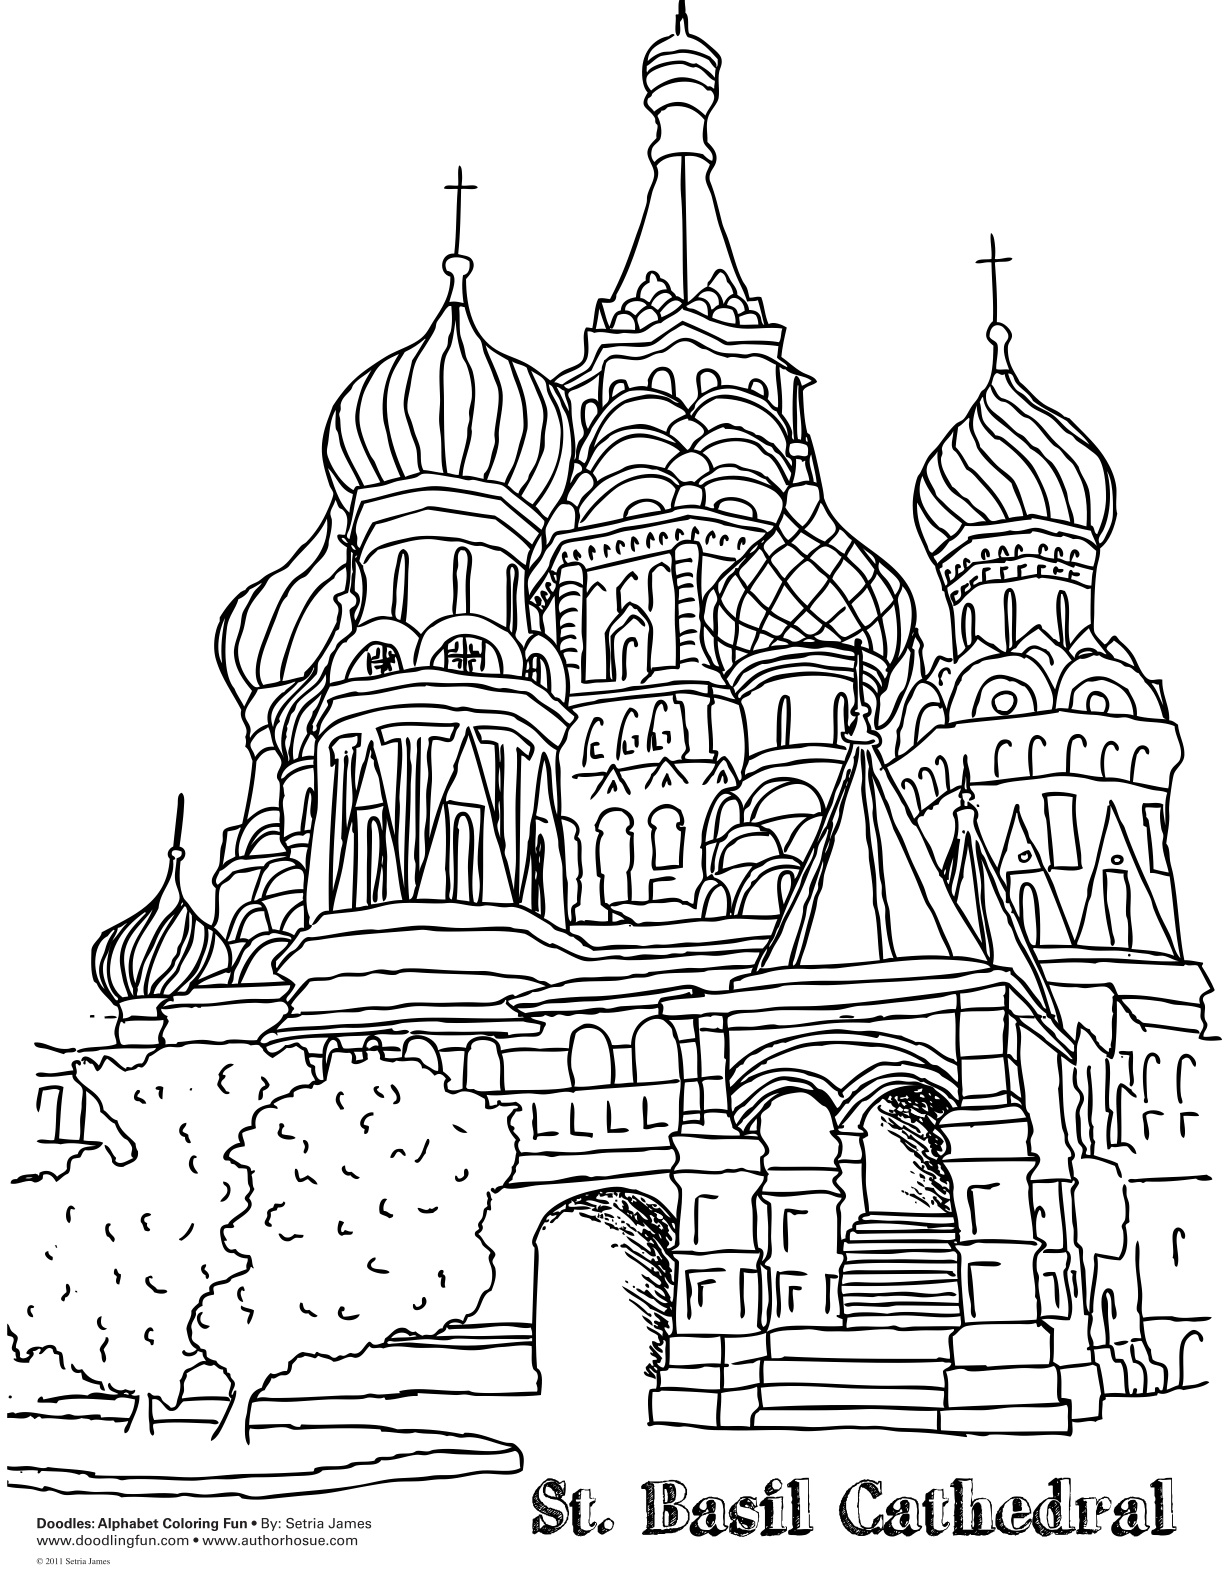 Architecture coloring #6, Download drawings